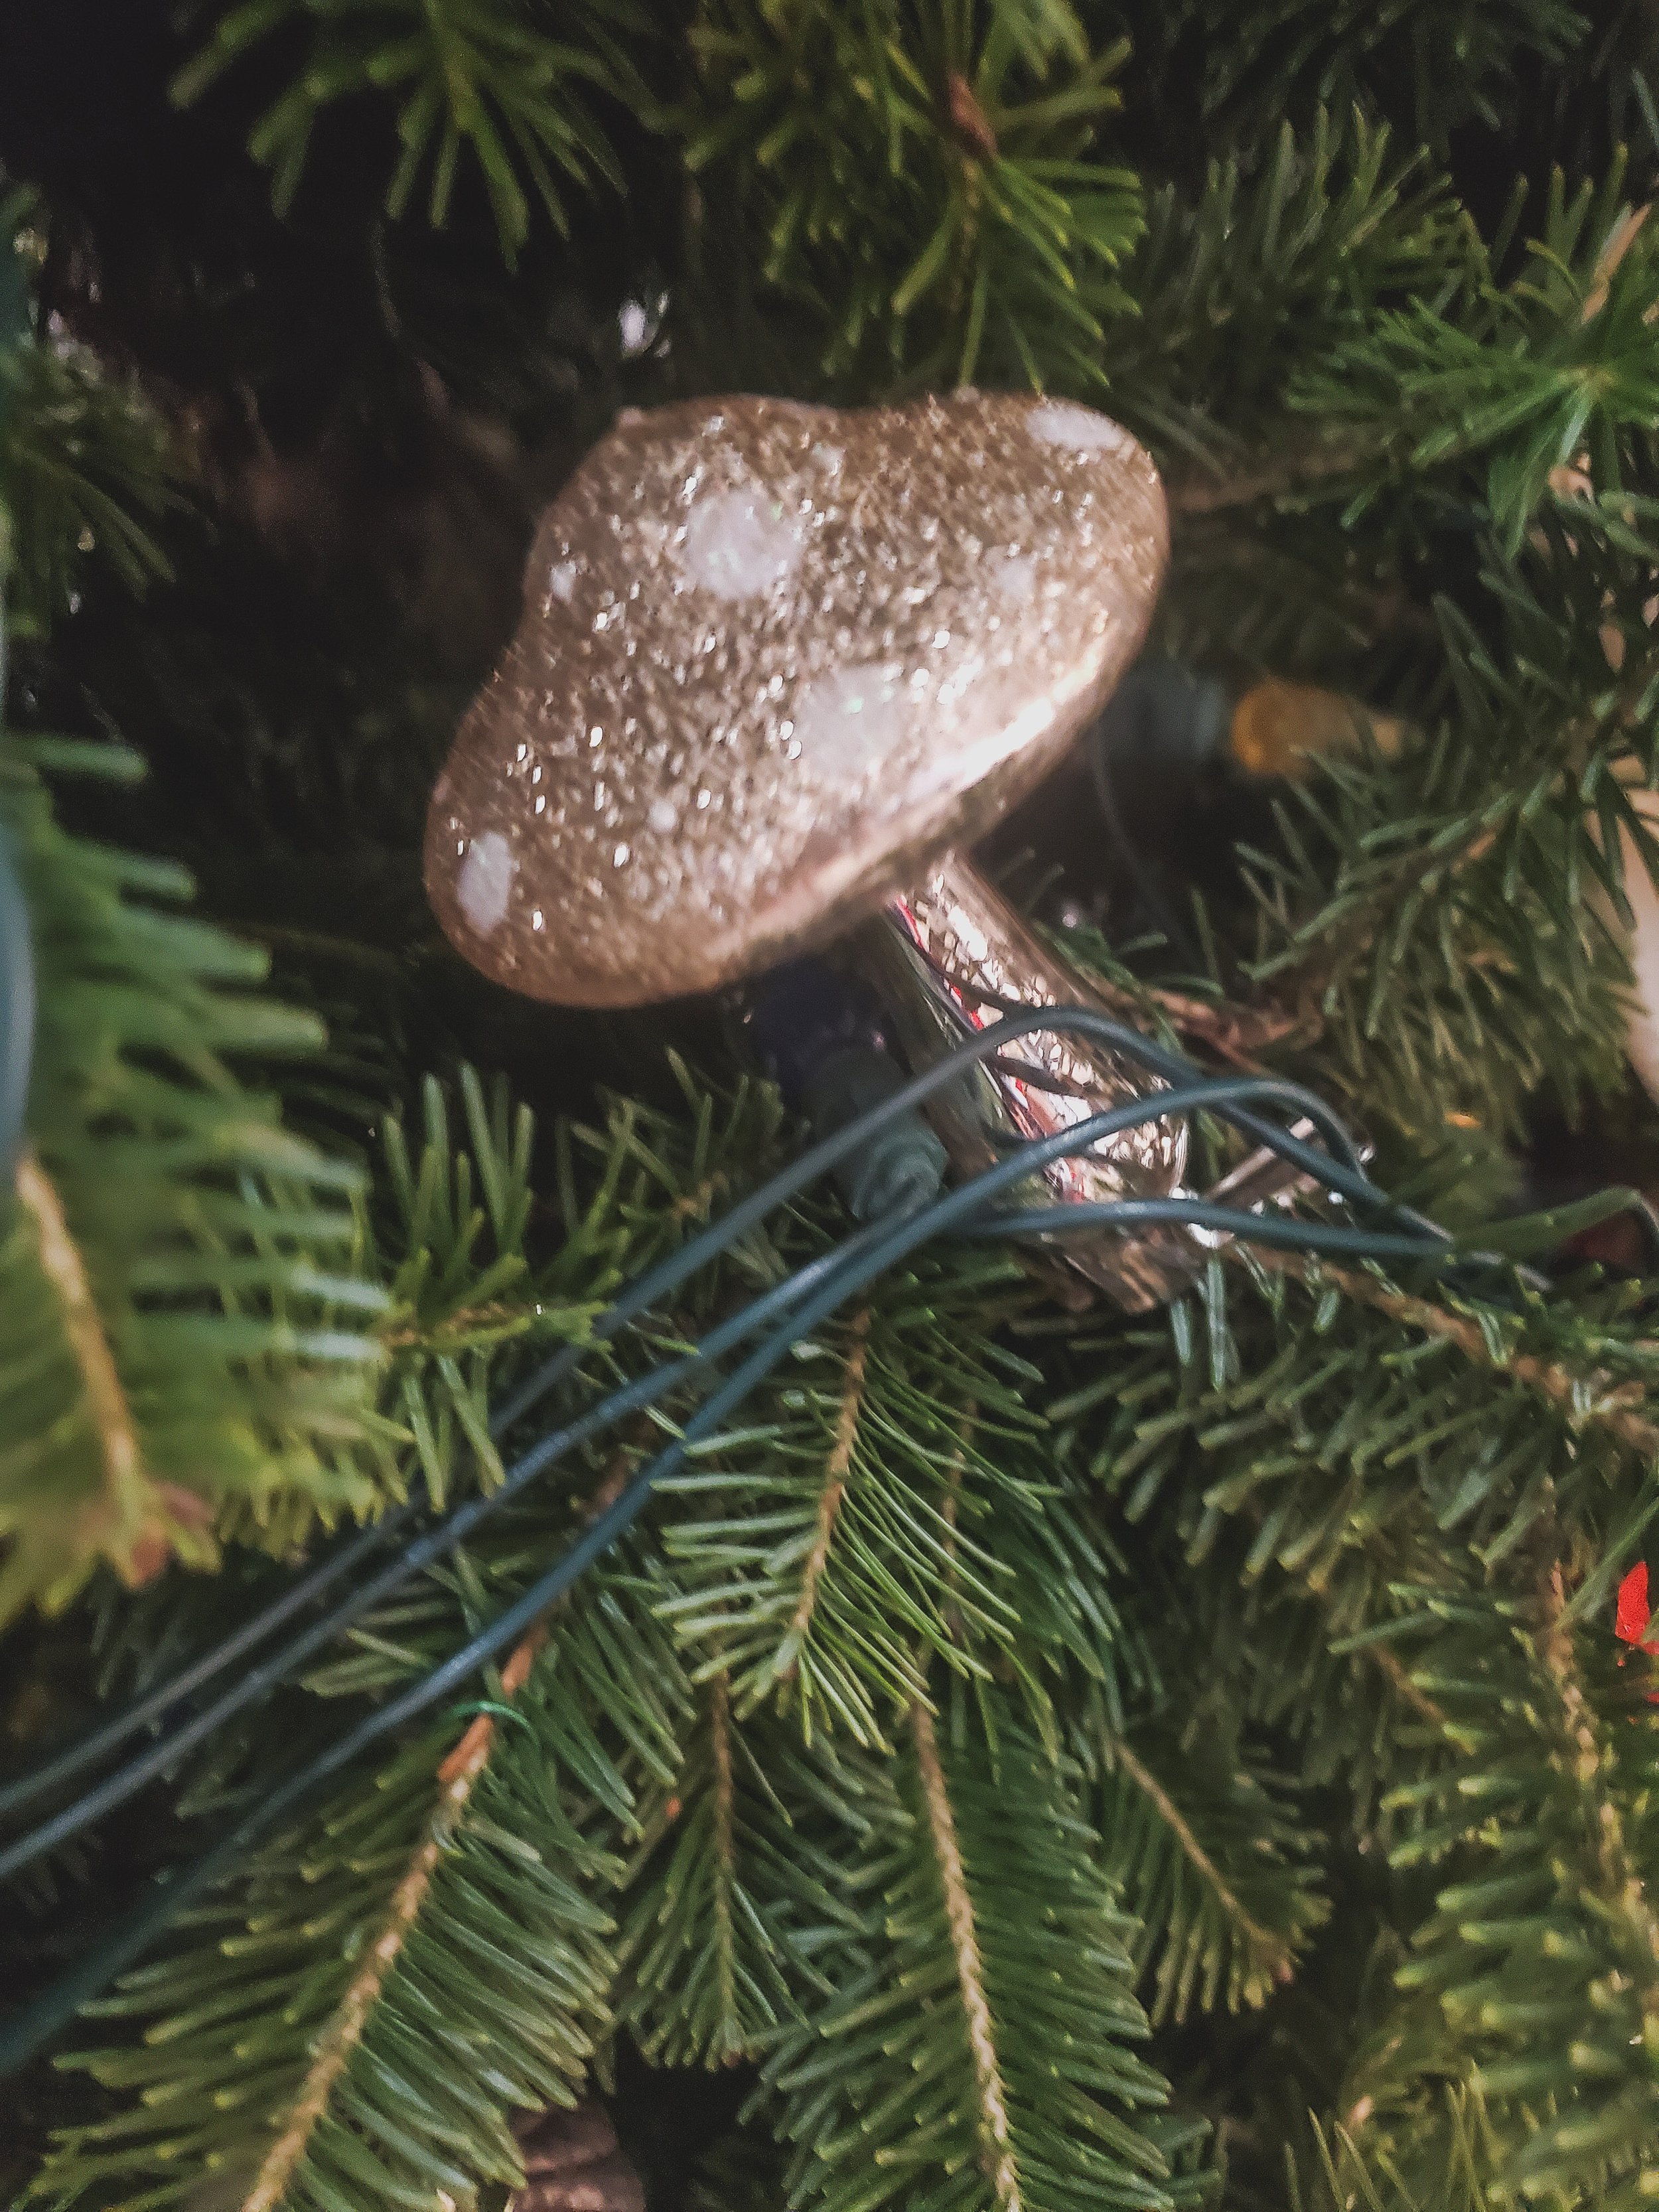  My favourite new decoration. I don’t even like to eat mushrooms but they are so cute when they are gold and sparkly. I also read a really great book about these wild mushrooms that had its own consciousness and so I’m weirdly into them for some reas